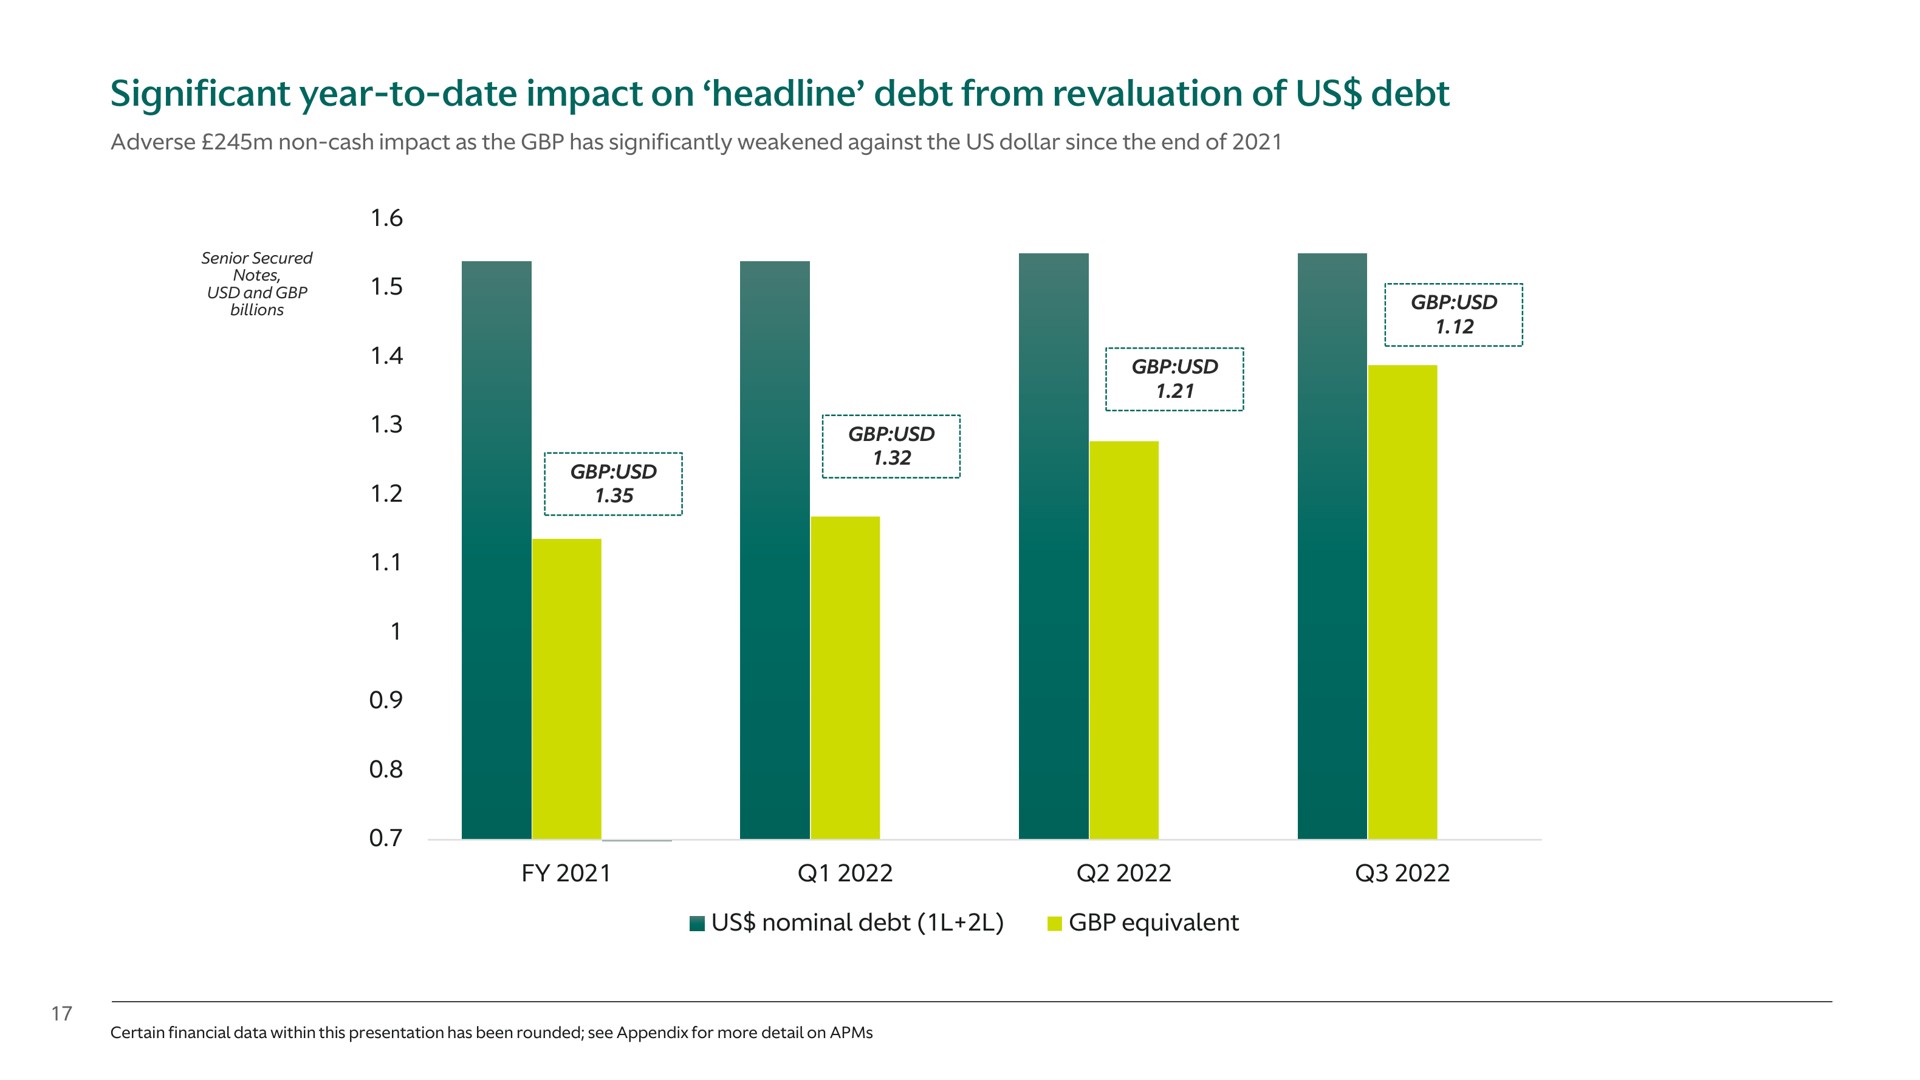 significant year to date impact on headline debt from revaluation of us debt us nominal debt equivalent and a i | Aston Martin Lagonda